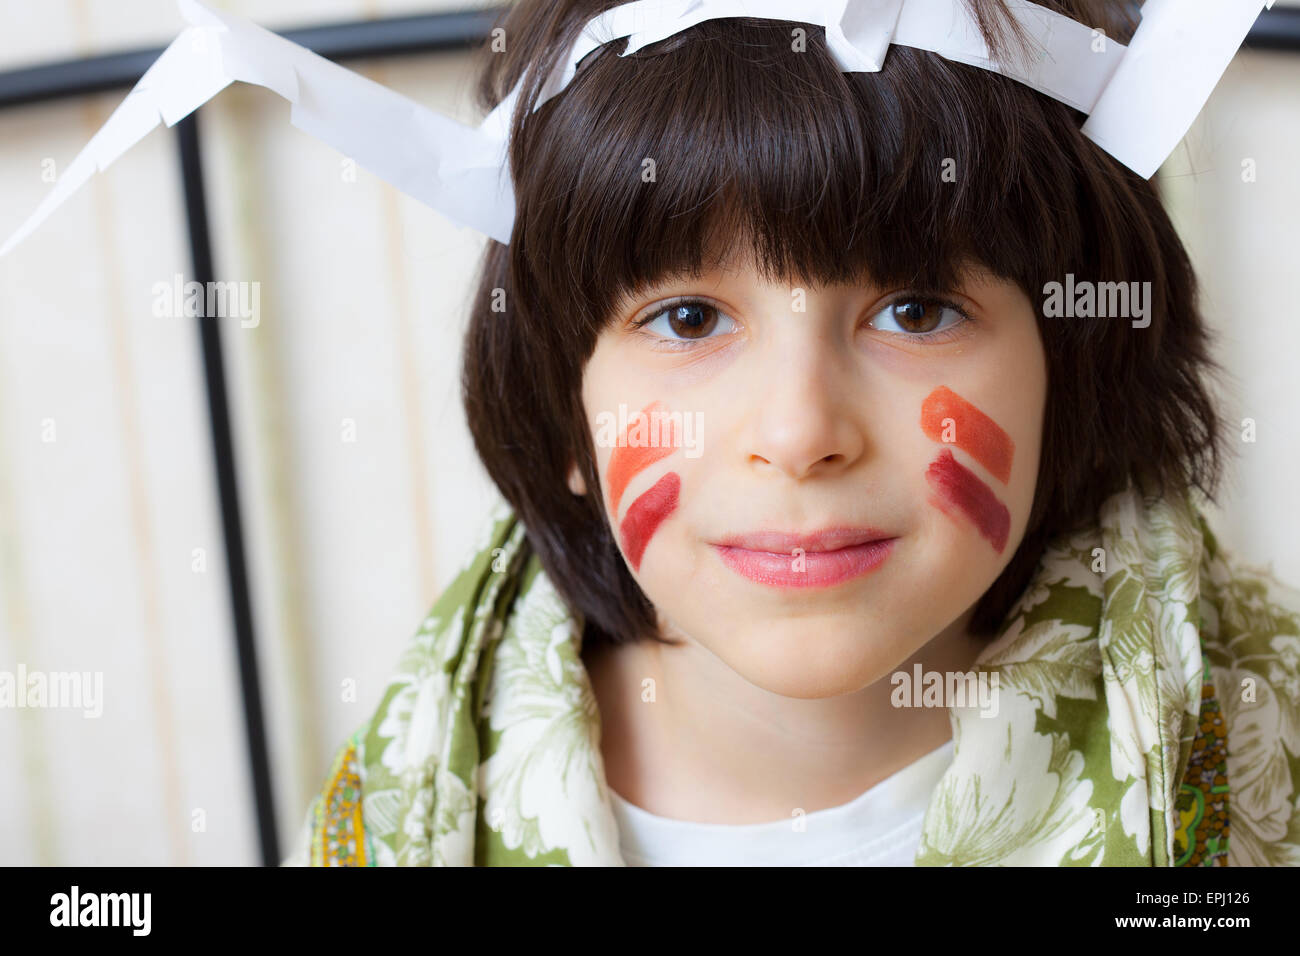 boy in a American Indian image Stock Photo